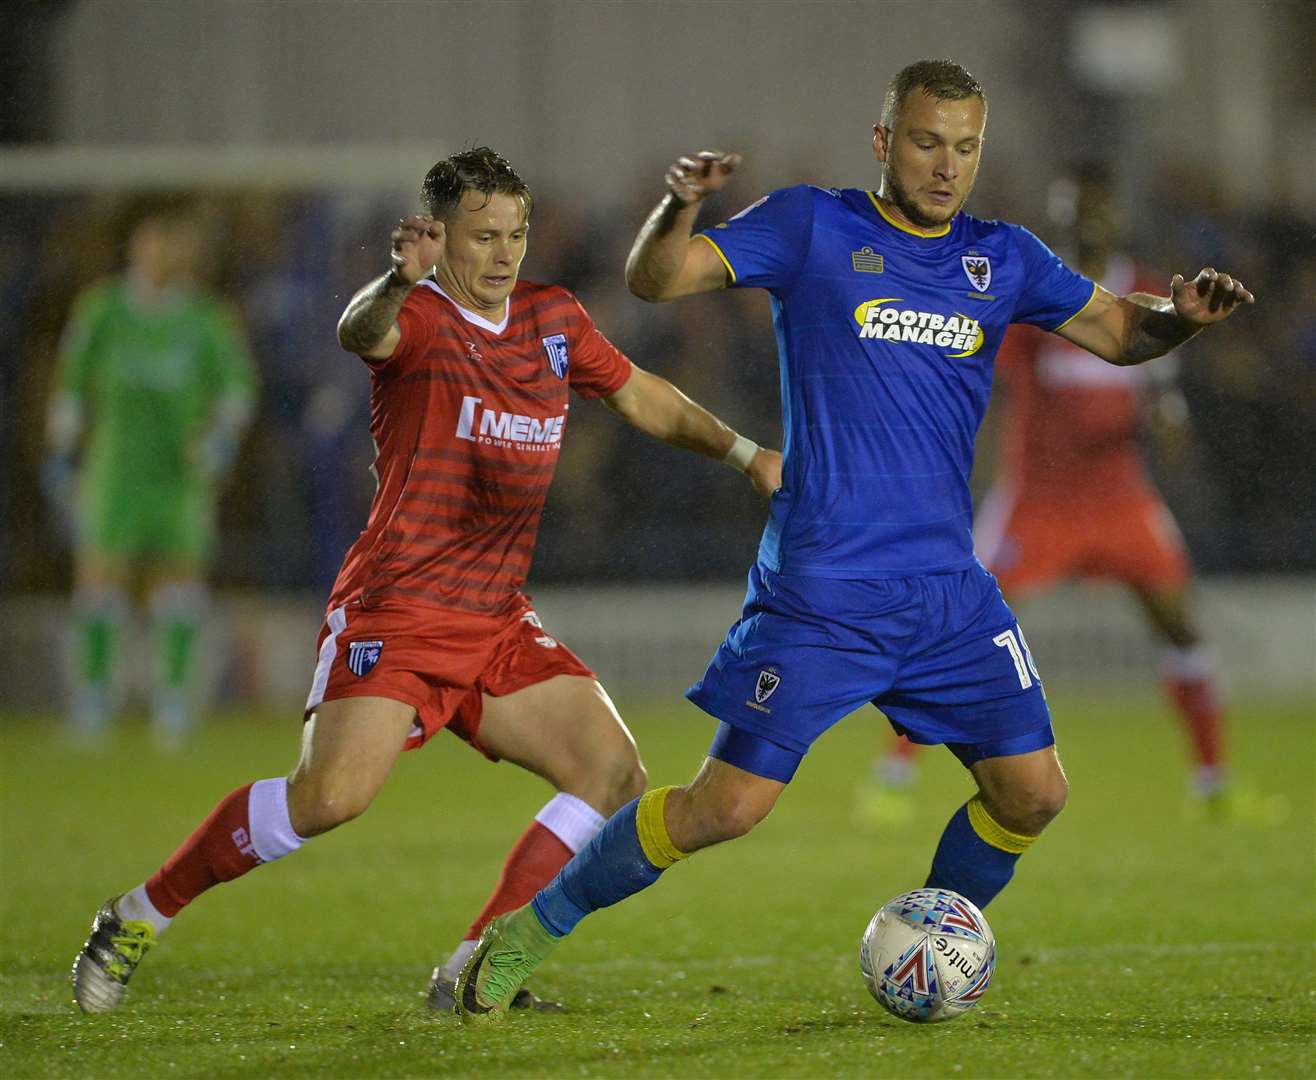 Mark Byrne challenges Gills' new signing Dean Parrett during a game against Wimbledon in September 2017